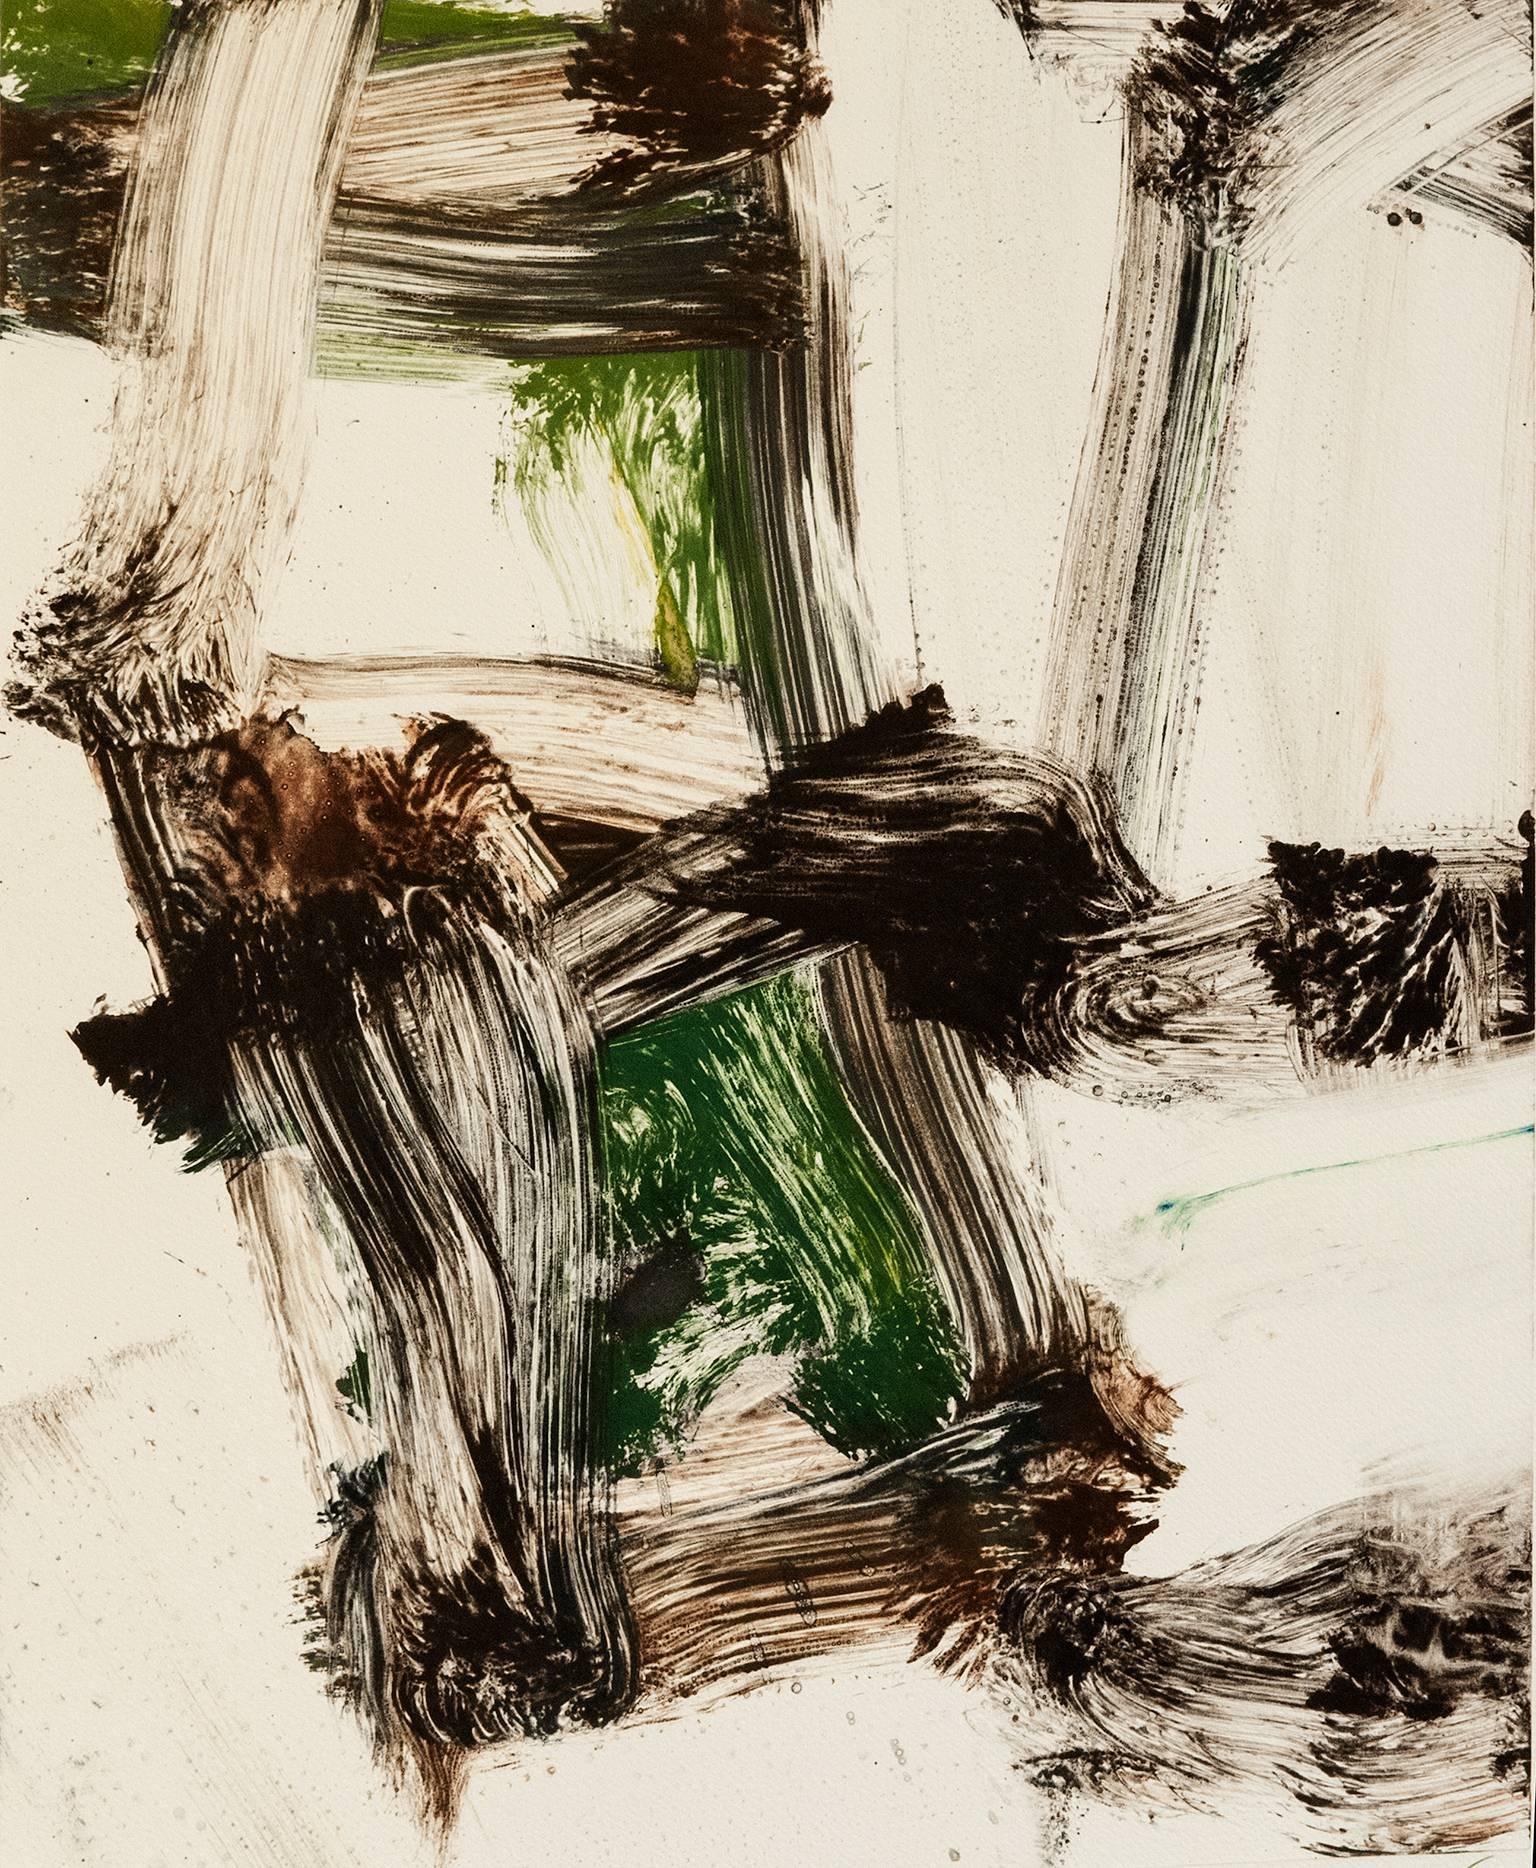 Mark Saltz Abstract Print – "July Series #19", painterly abstract expressionist monoprint, green, umber.